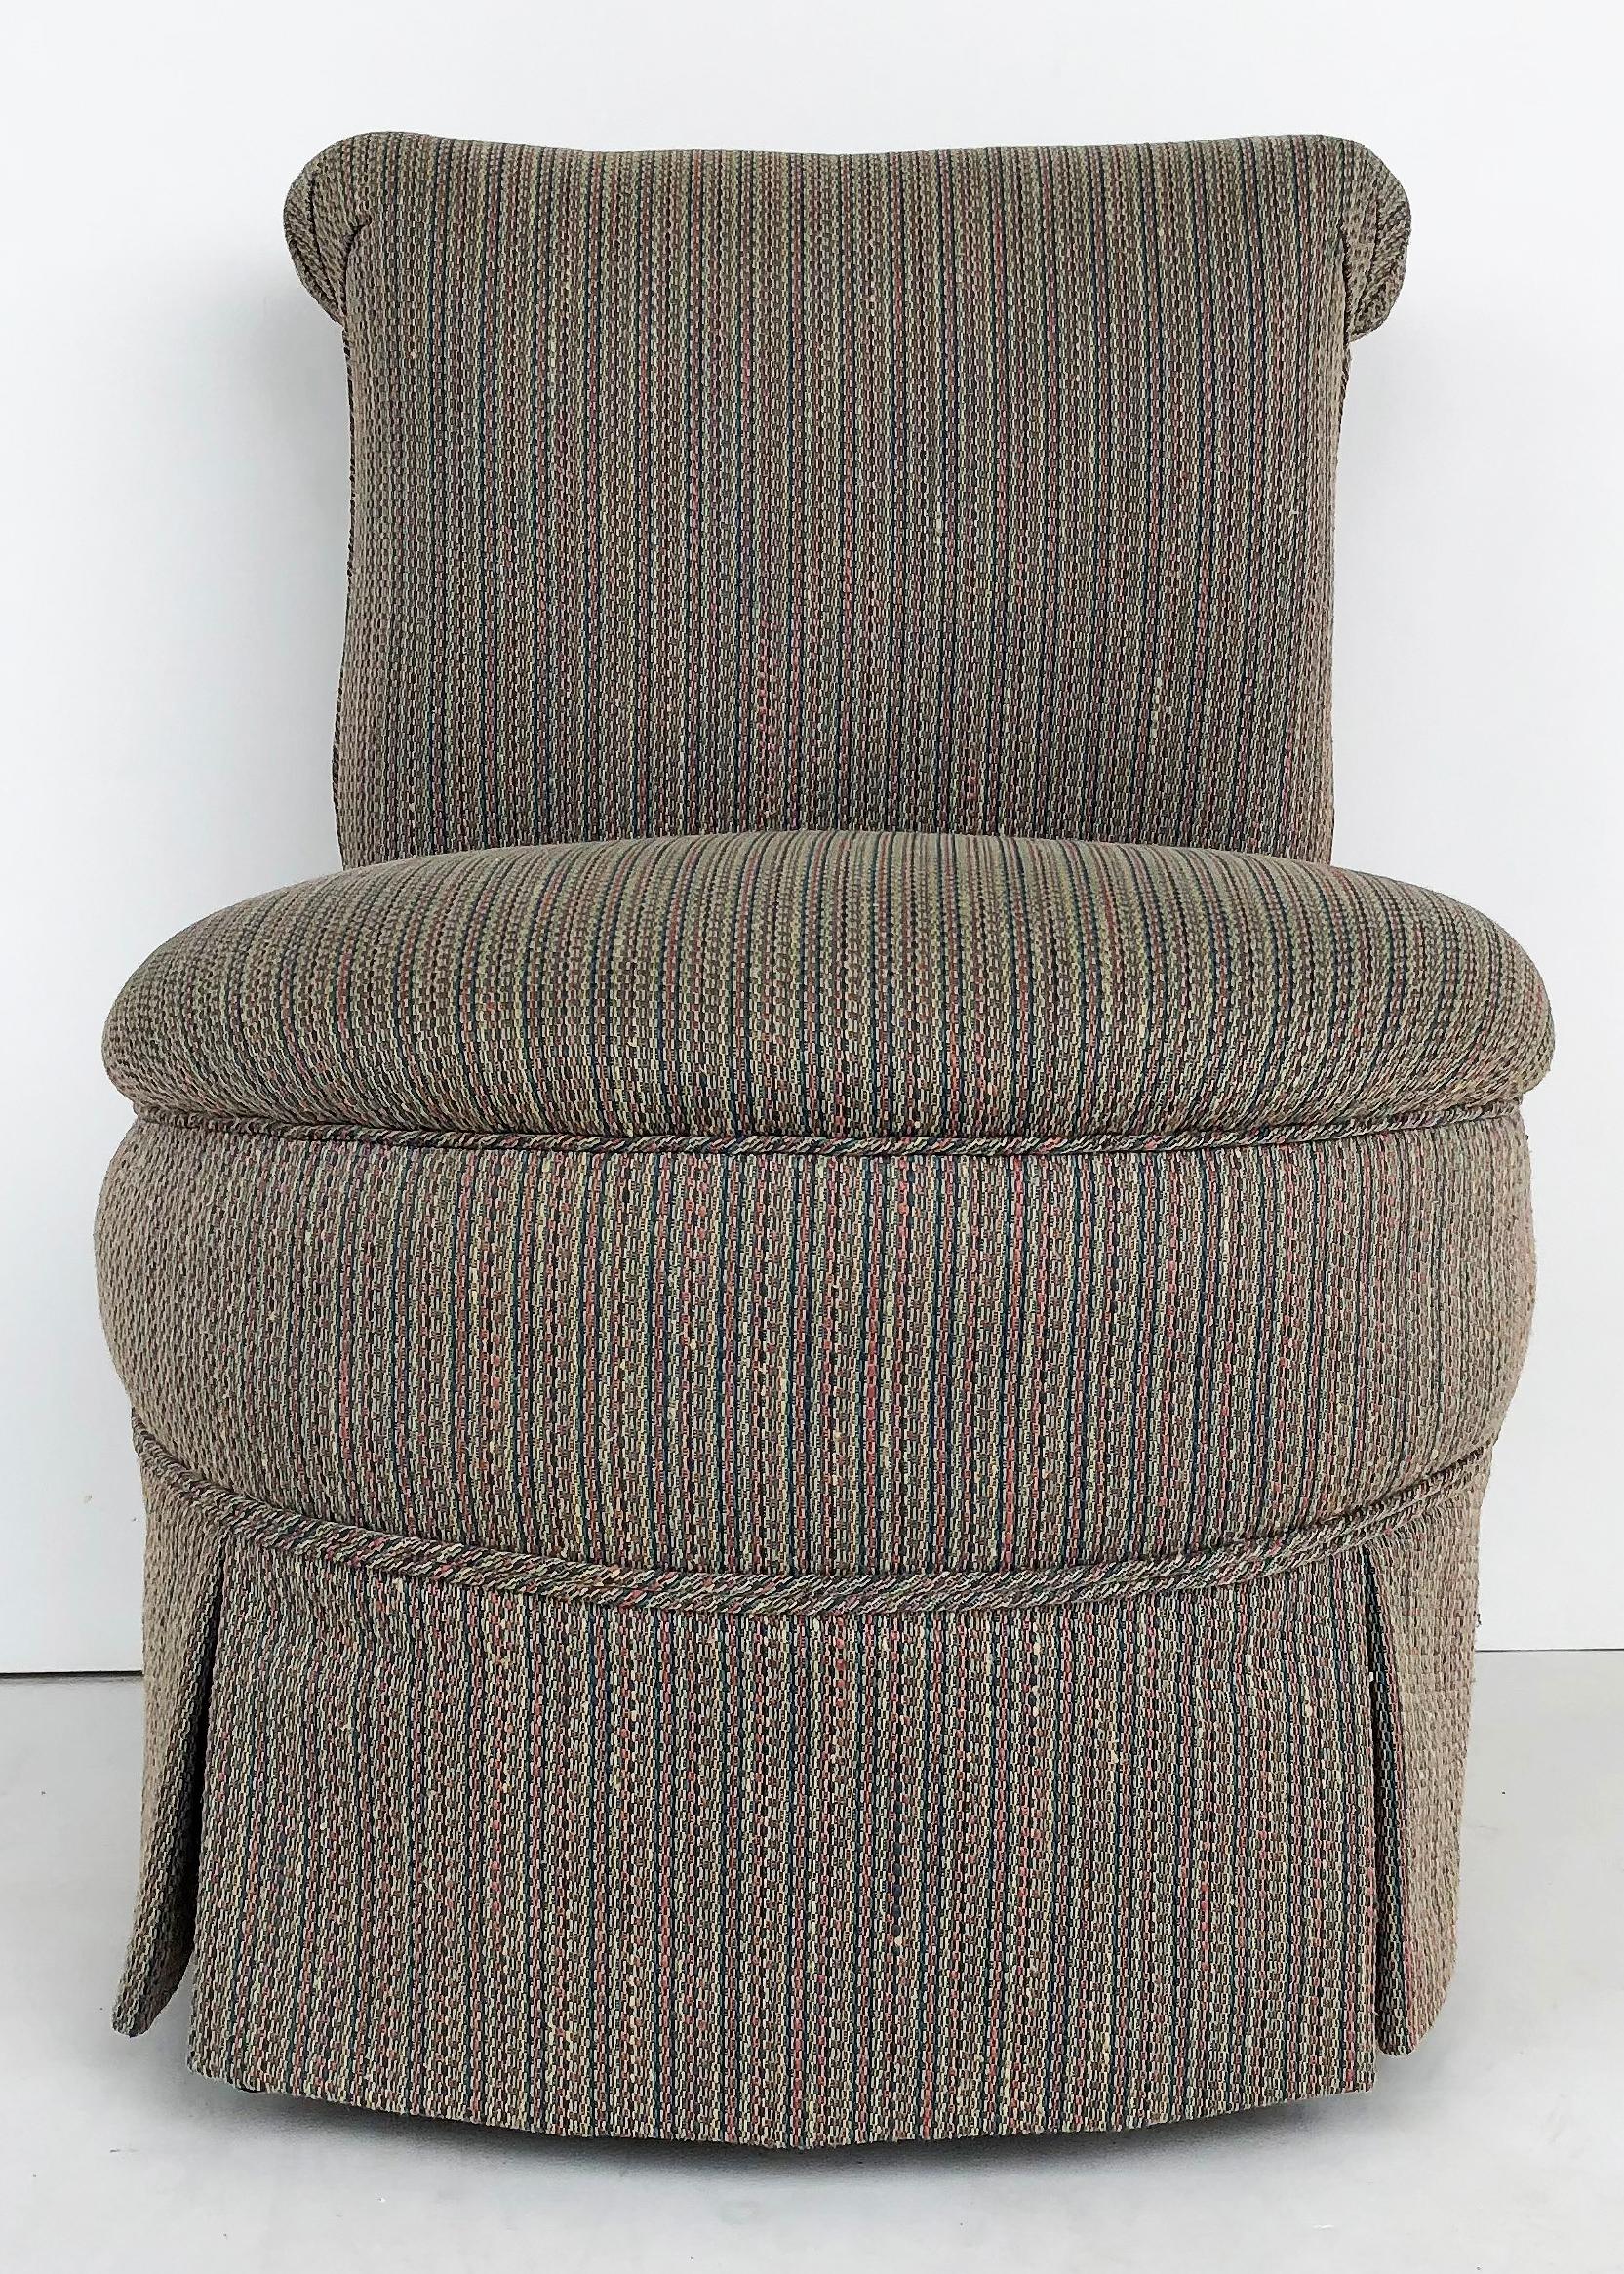 Antique Napoleon III slipper chair circa 1900, turned legs on casters 

Offered is a Napoleon III slipper chair c1900 with turned front tapering, conical legs on casters, and later upholstery. The matching settee to this chair is offered in a